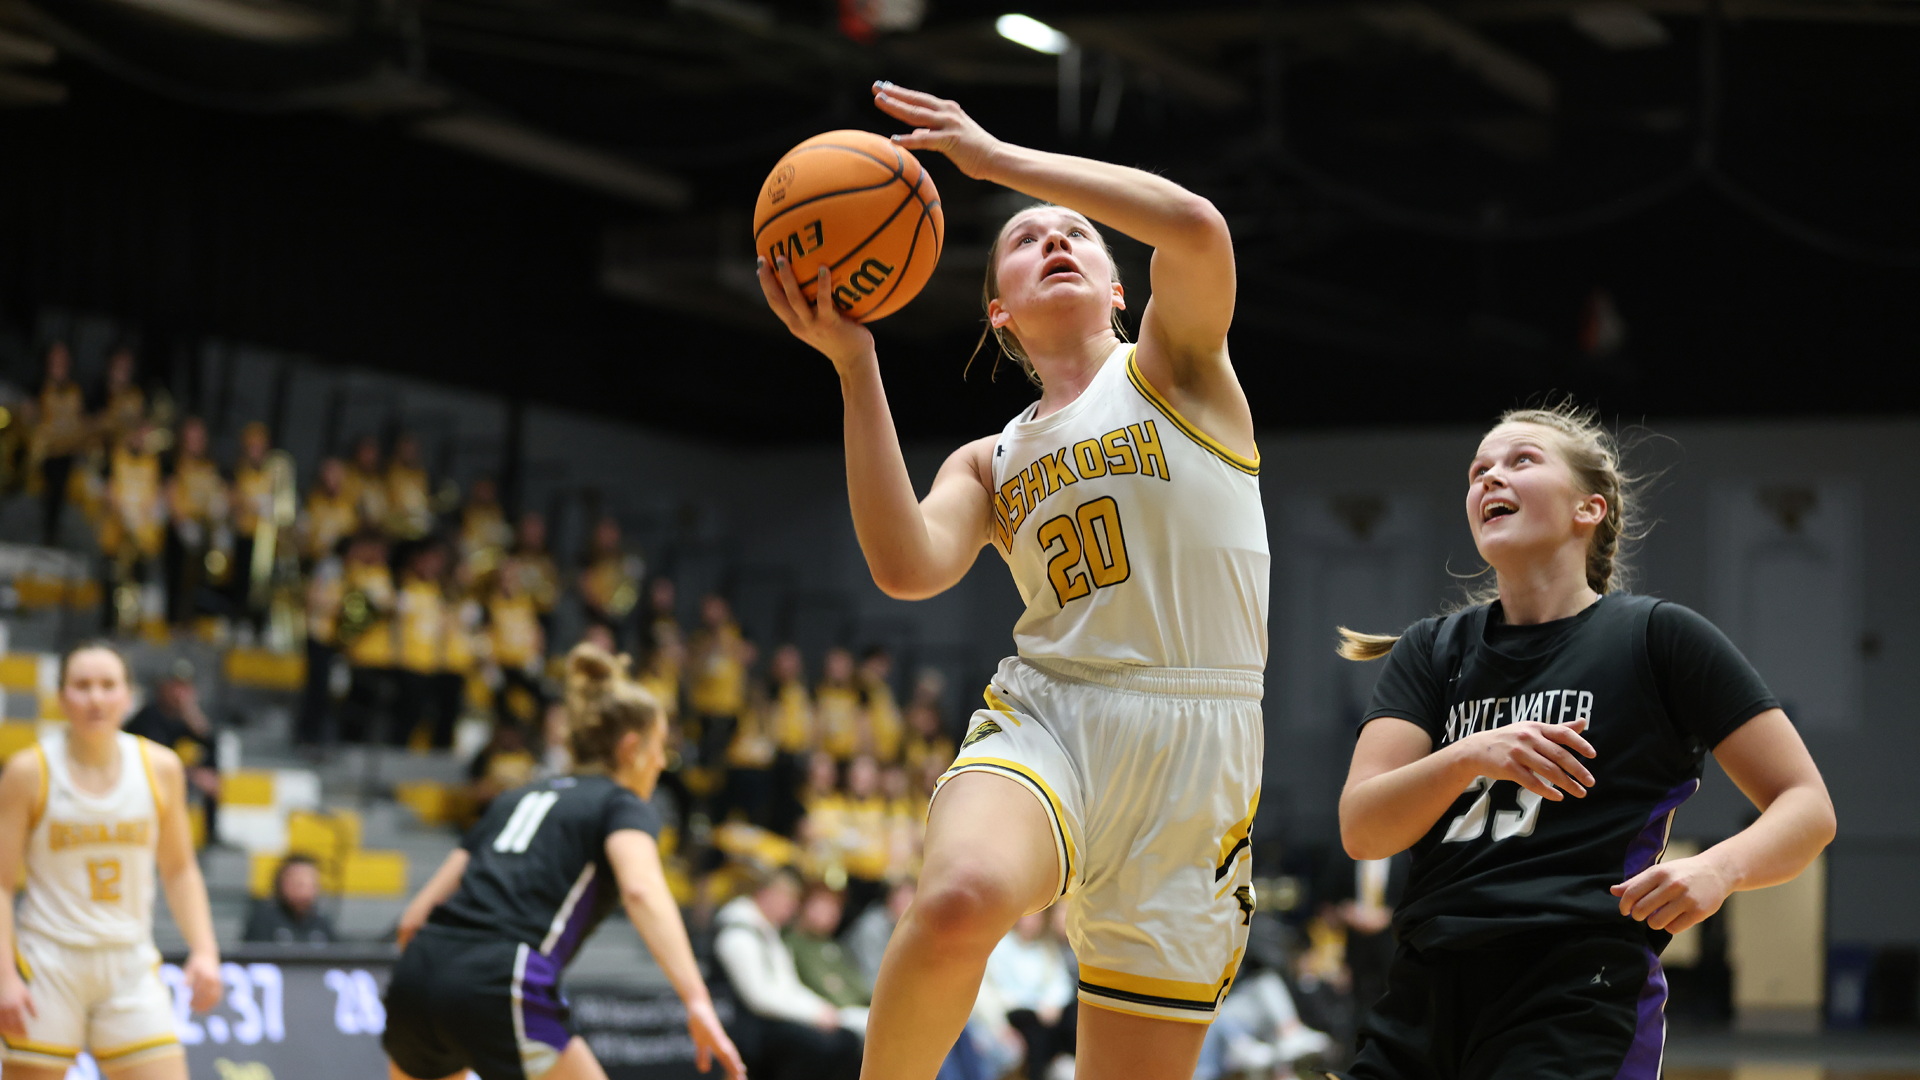 Mackenzie Tlachac recorded career-highs in points (21) and rebounds (eight) against UW-Whitewater on Wednesday